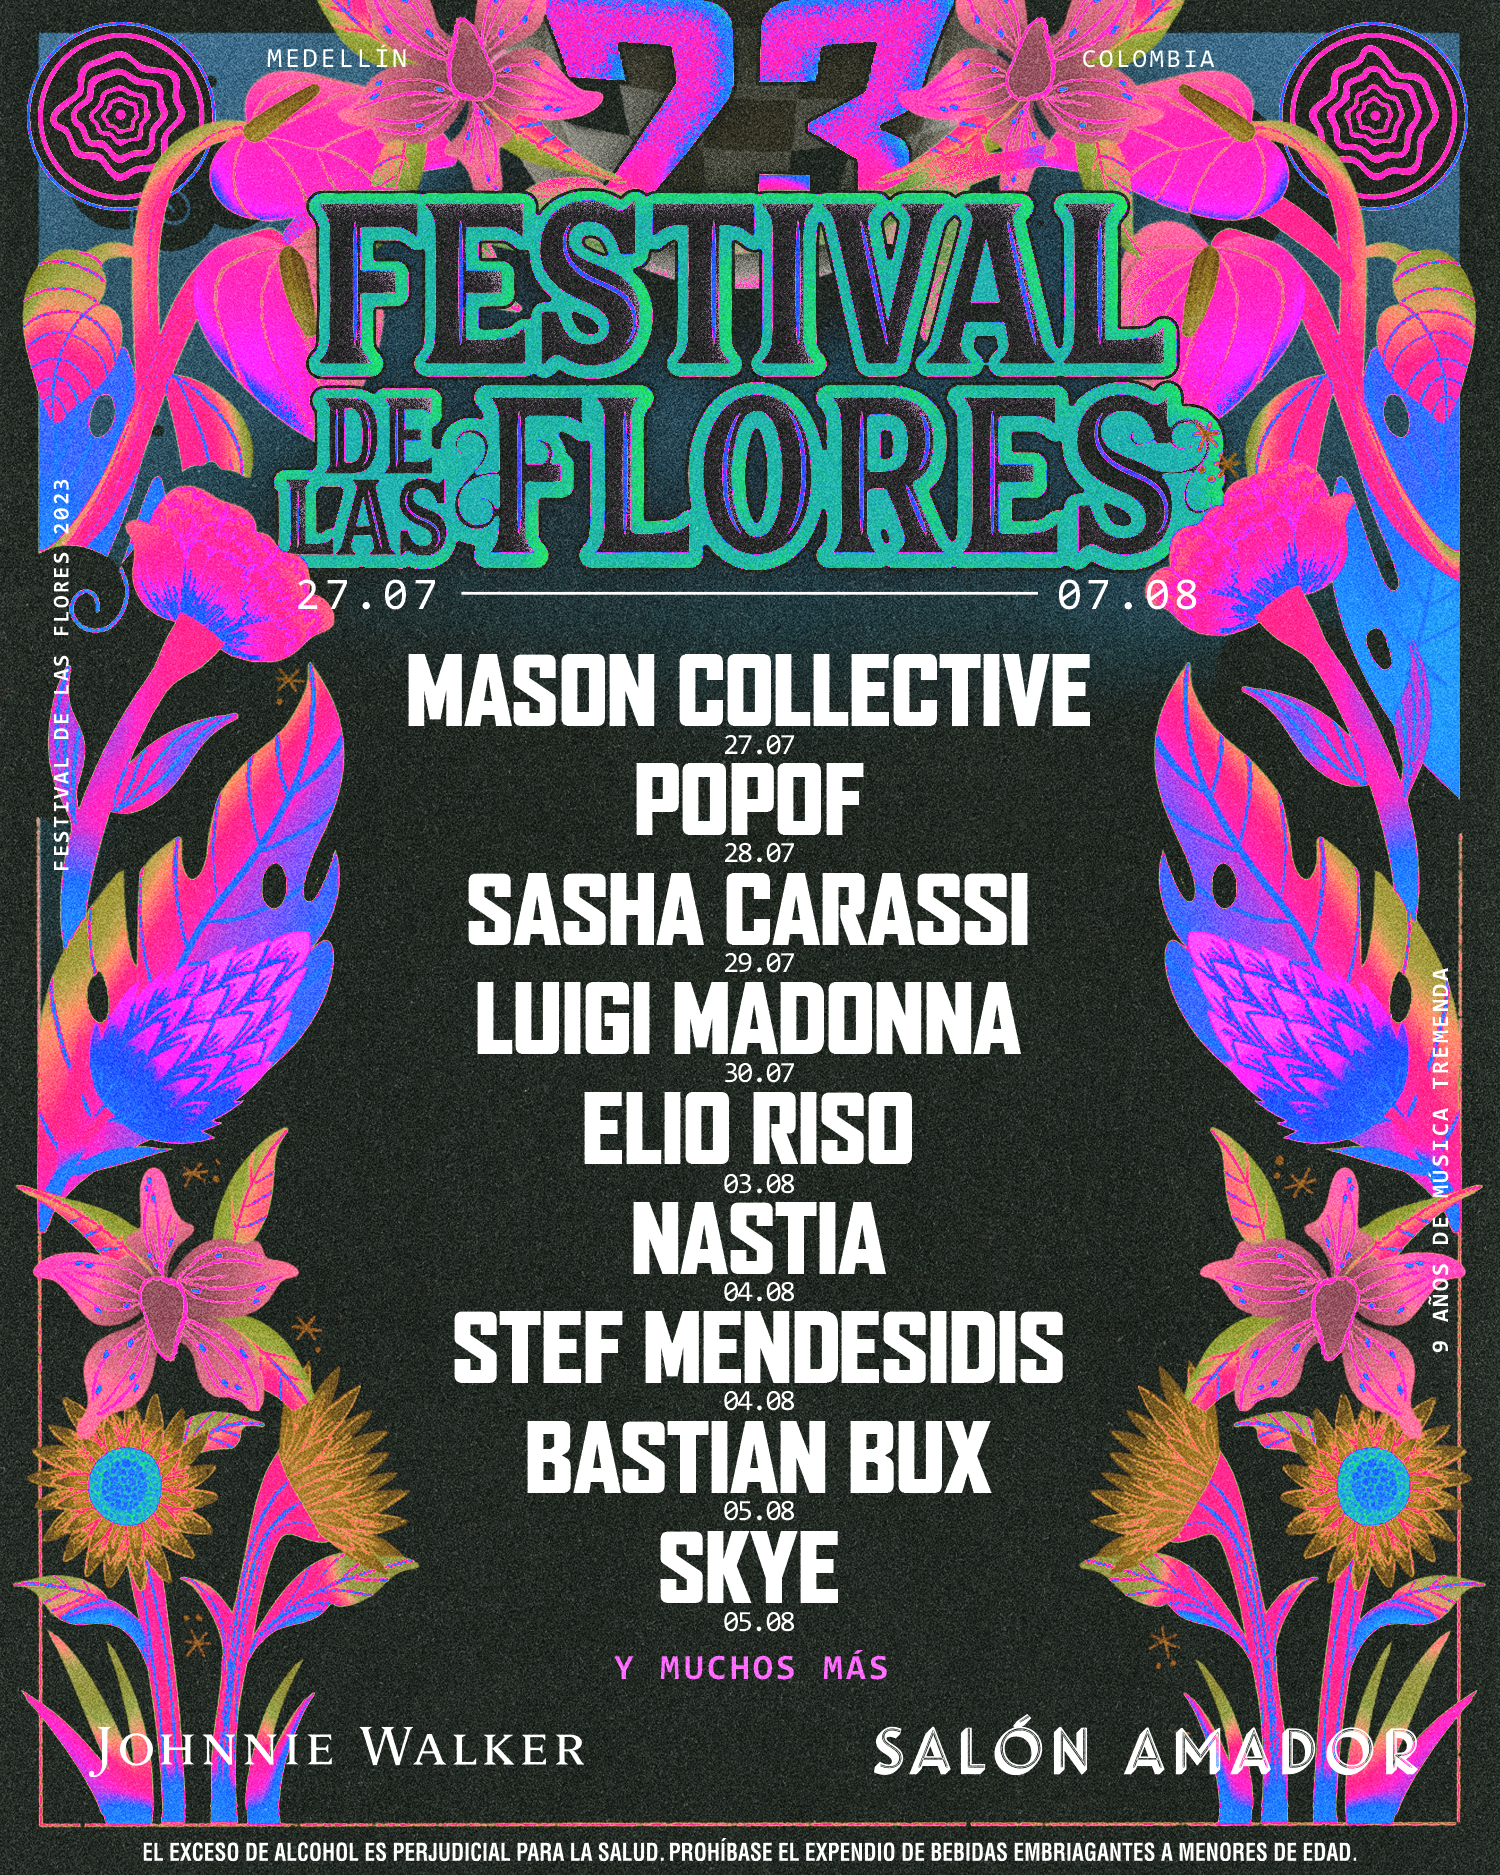 From the South presents Mason Collective & Bastidas - フライヤー表